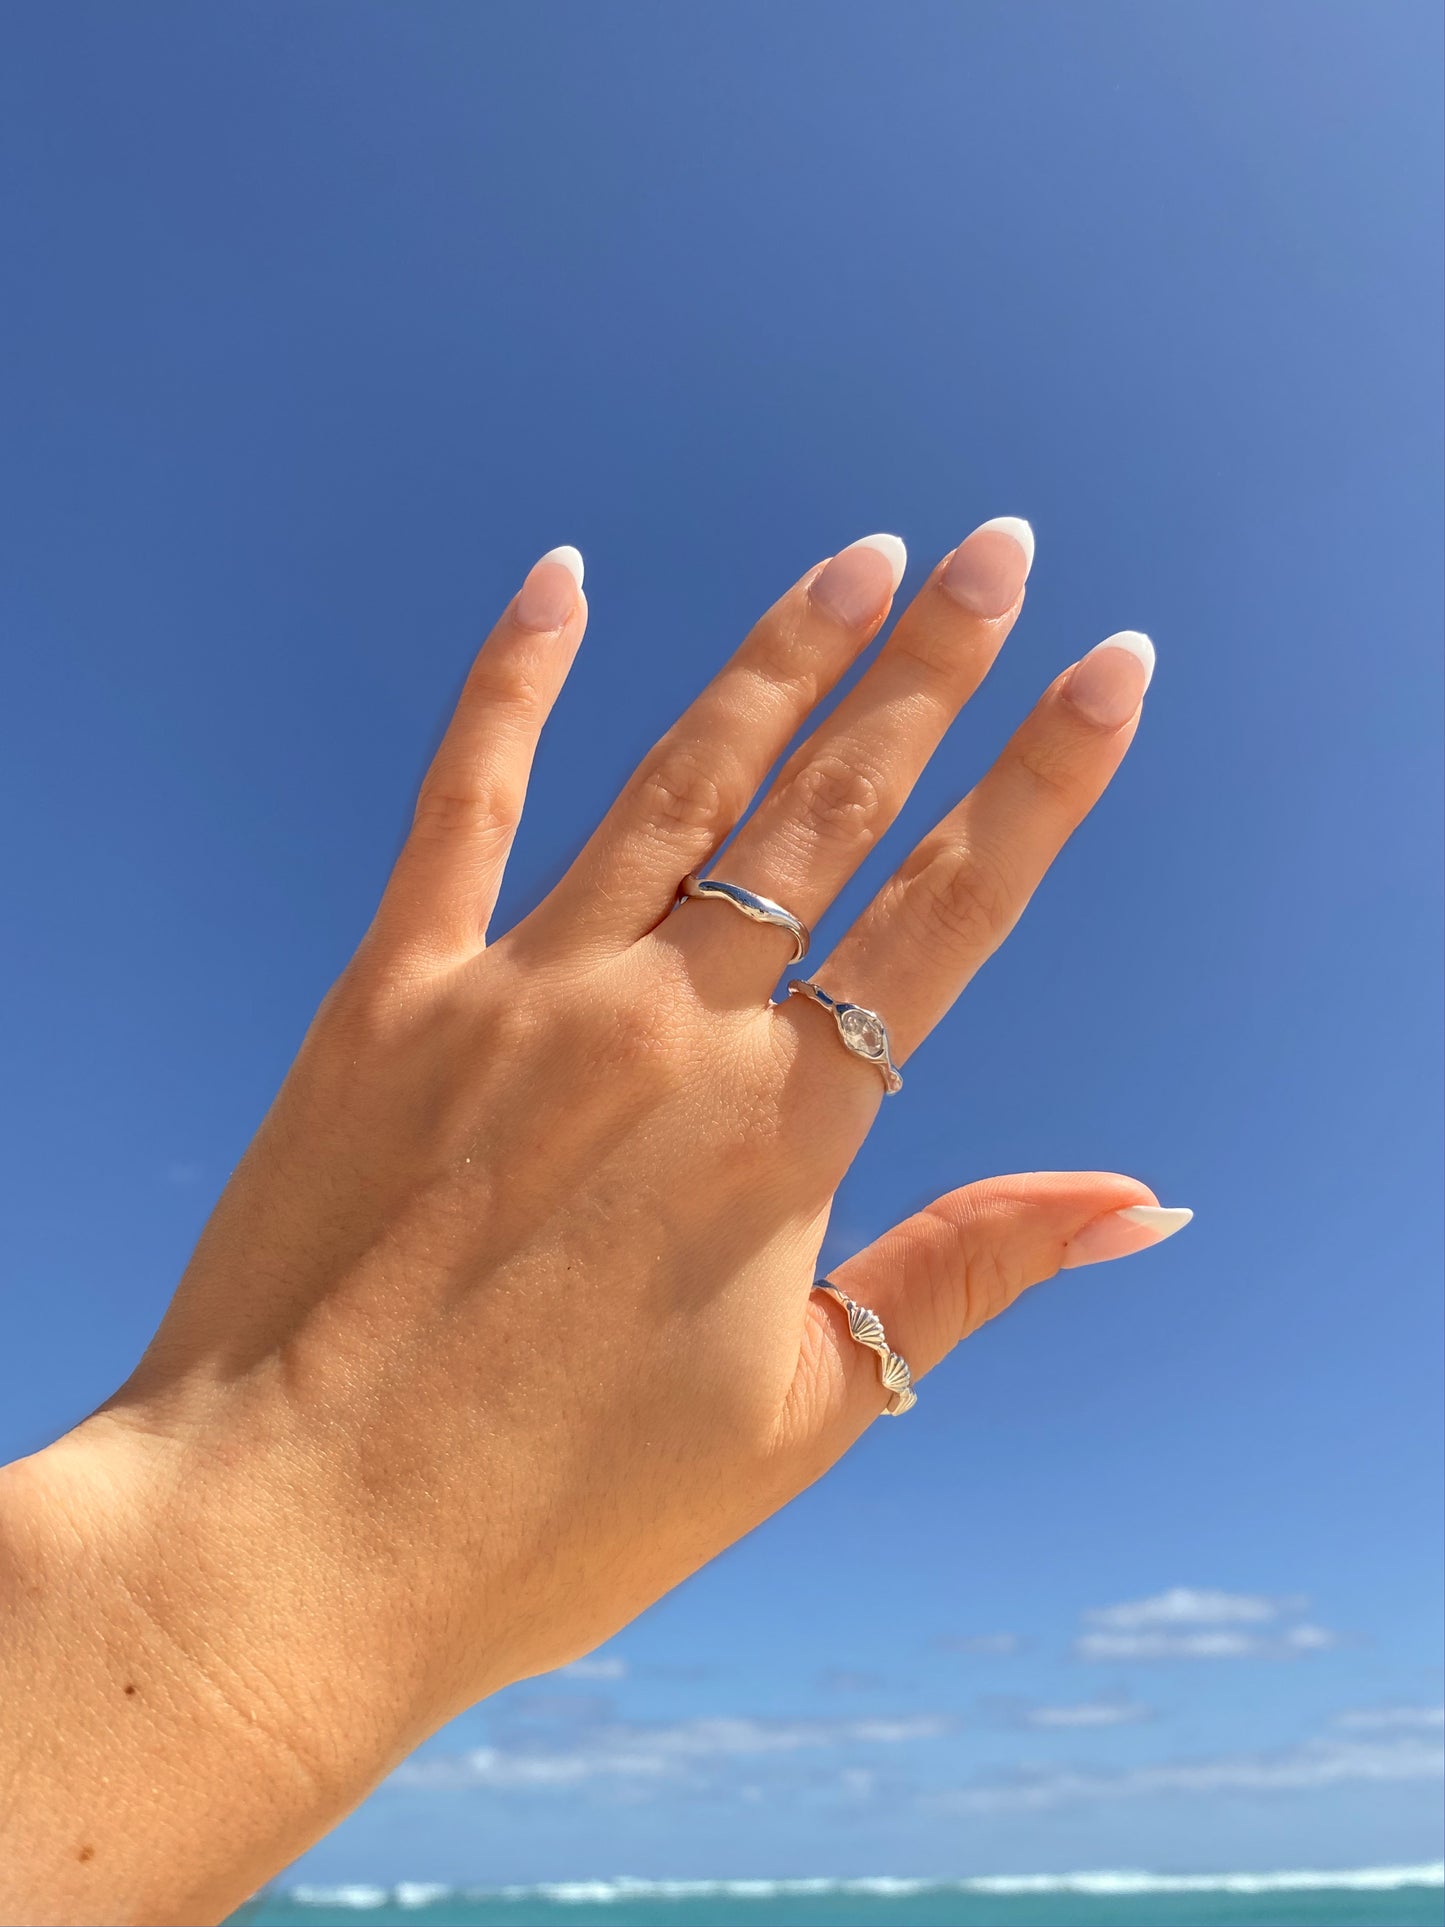 Seashell Minimalist Ring in 925 sterling silver ∙ Beach Jewelry ∙ 1 Size Fits All ∙ Hypoallergenic ∙ Boho Chic ∙ Waterproof